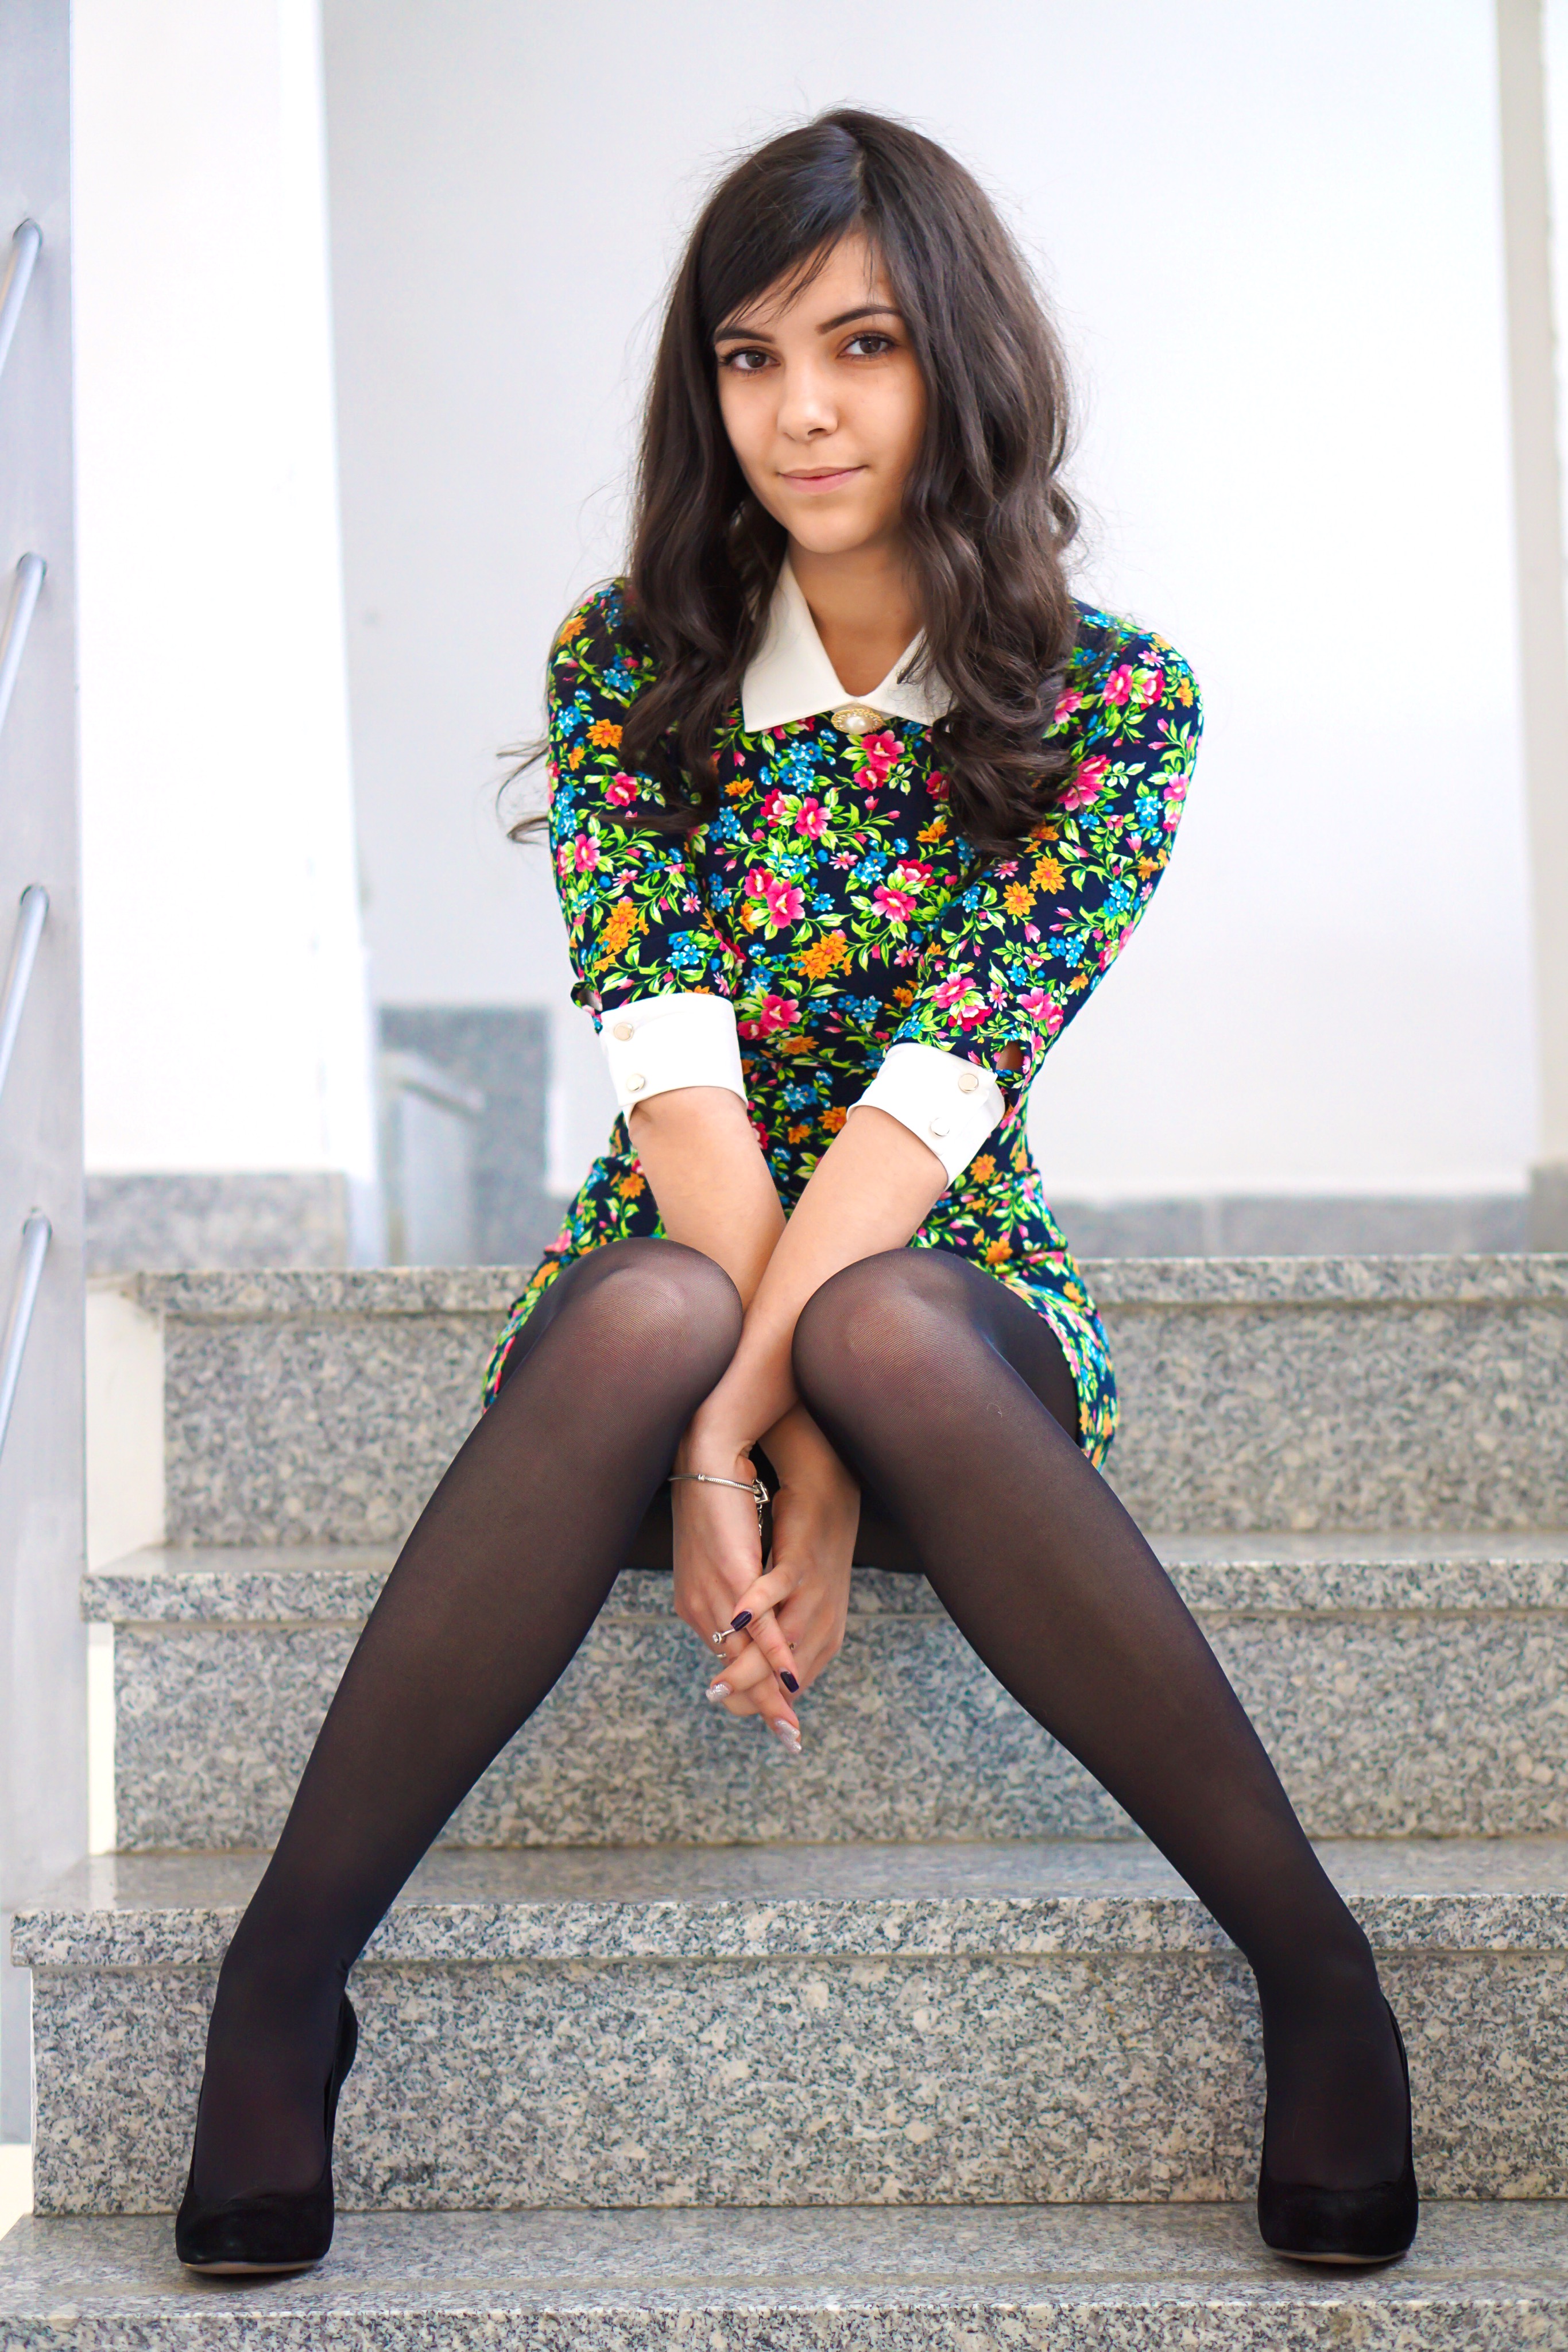 A dark-haired girl in a flowered dress sits on the steps